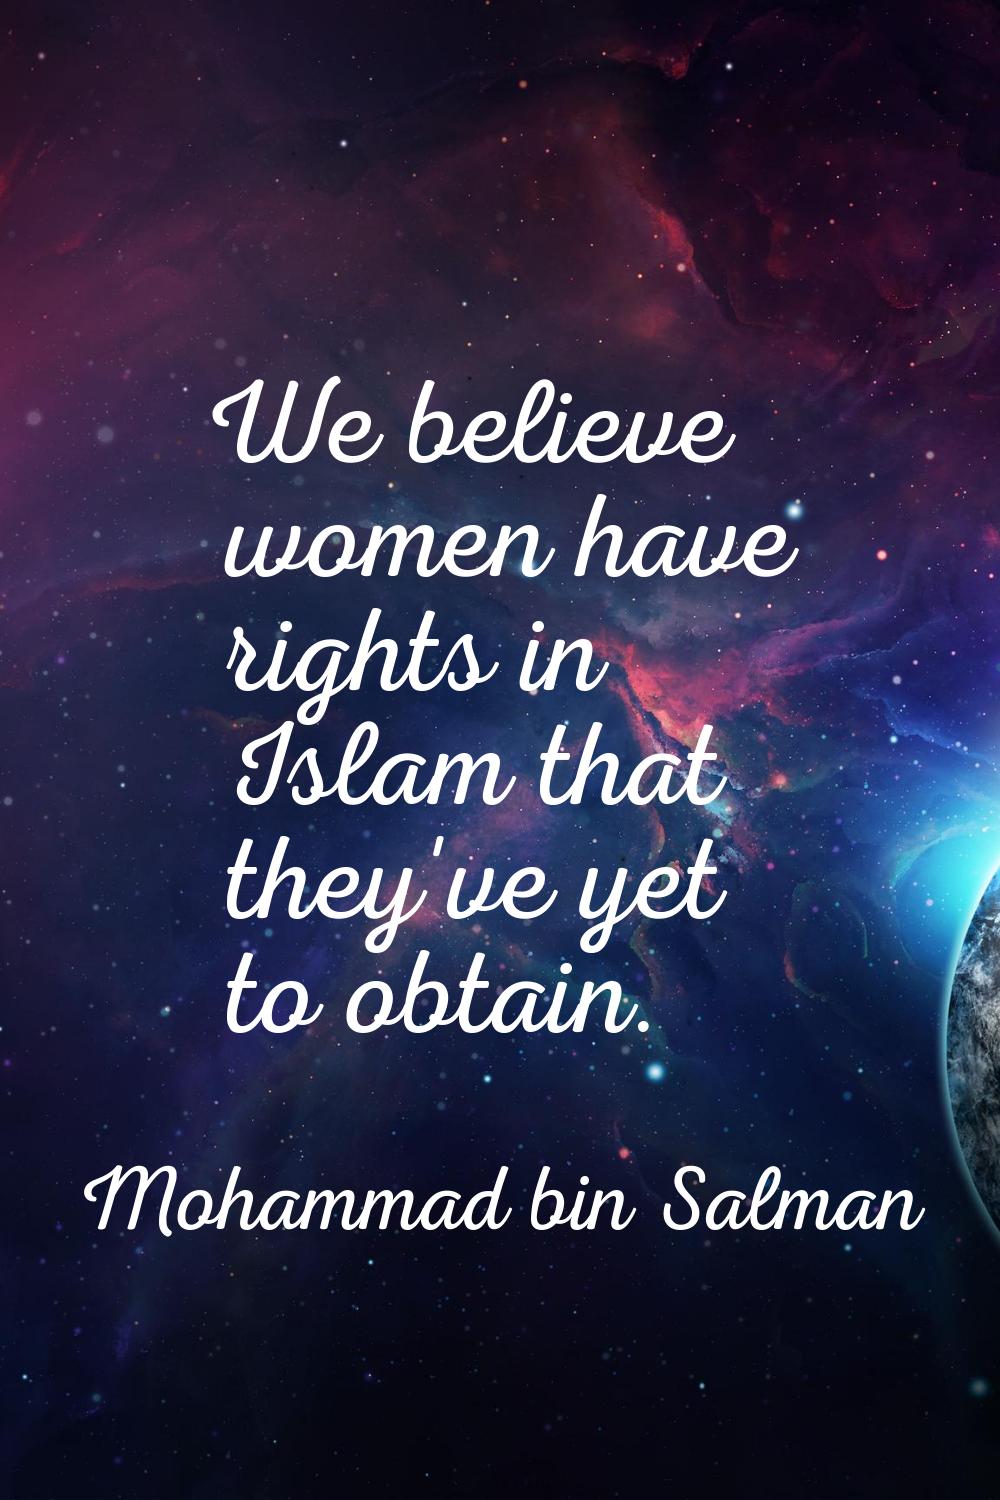 We believe women have rights in Islam that they've yet to obtain.